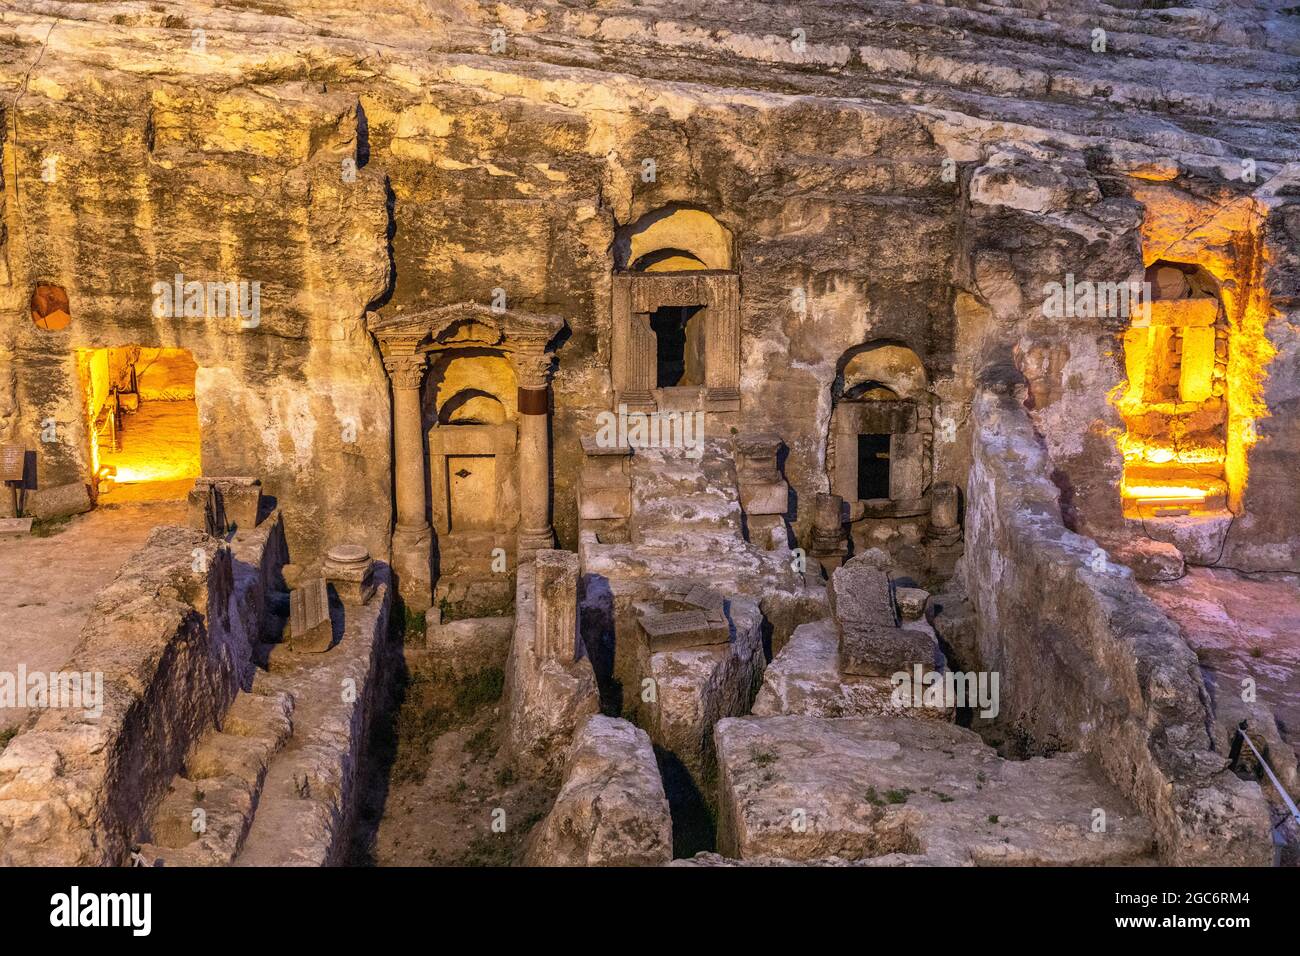 Exterior view of the 2000-year-old Kizilkoyun rock tombs from the Roman period in Sanliurfa, Turkey on May 27, 2021. Stock Photo